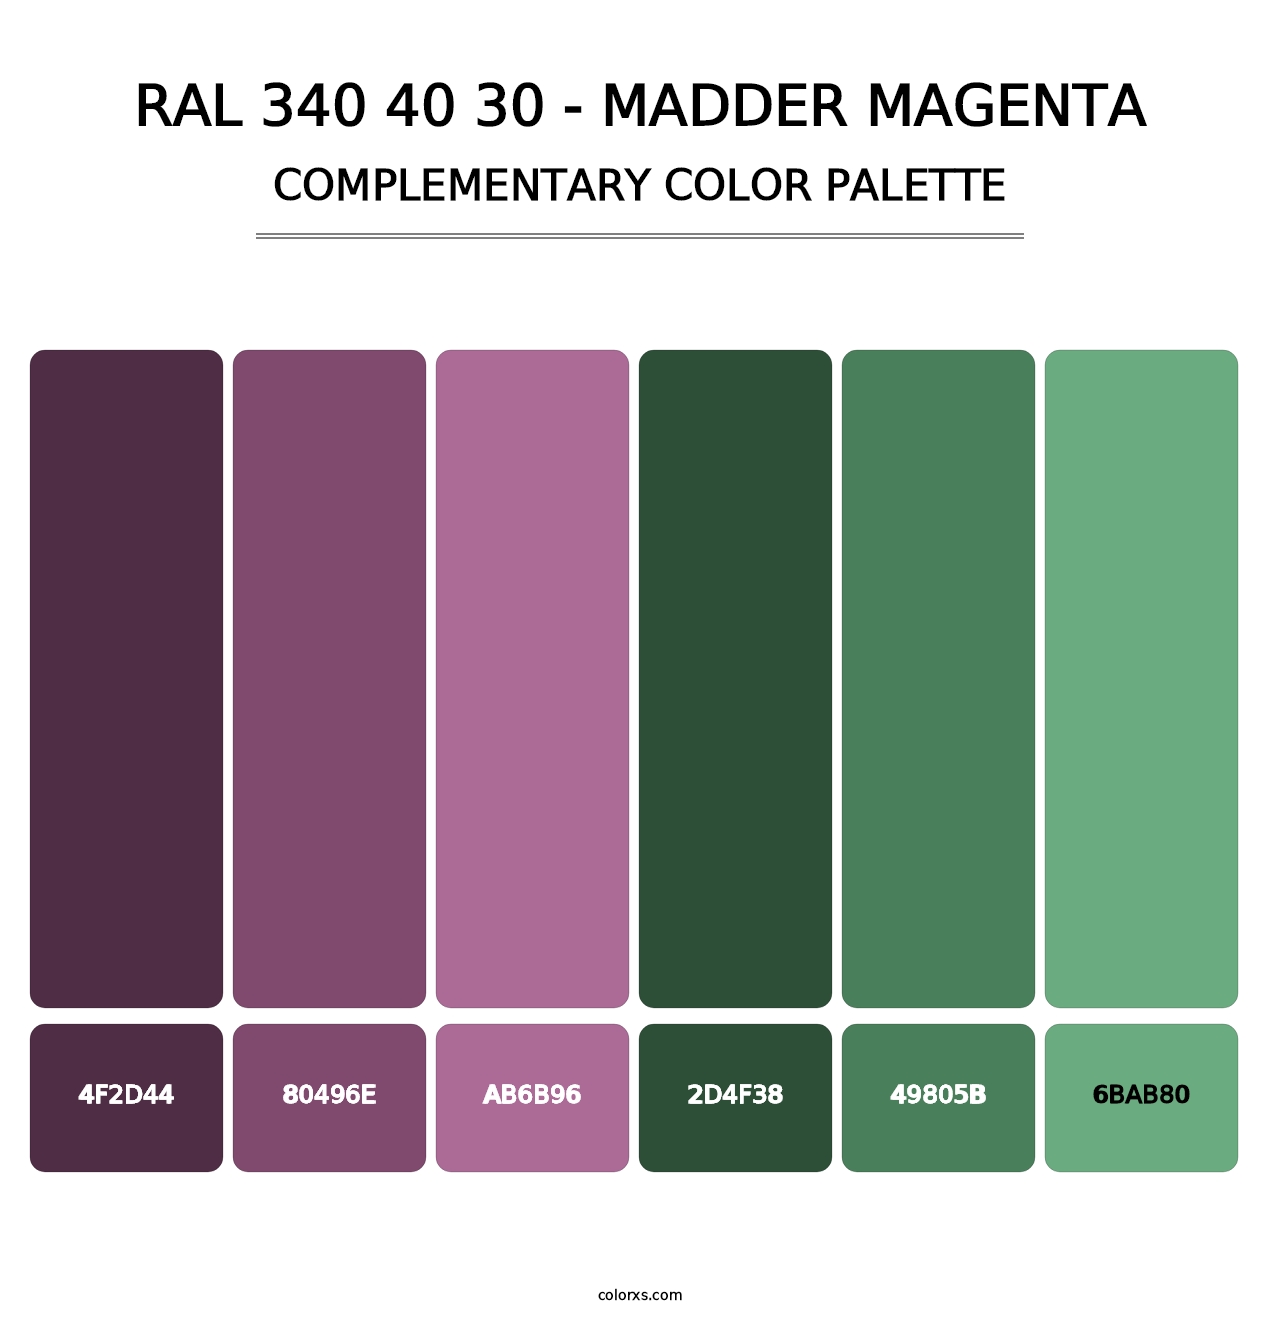 RAL 340 40 30 - Madder Magenta - Complementary Color Palette